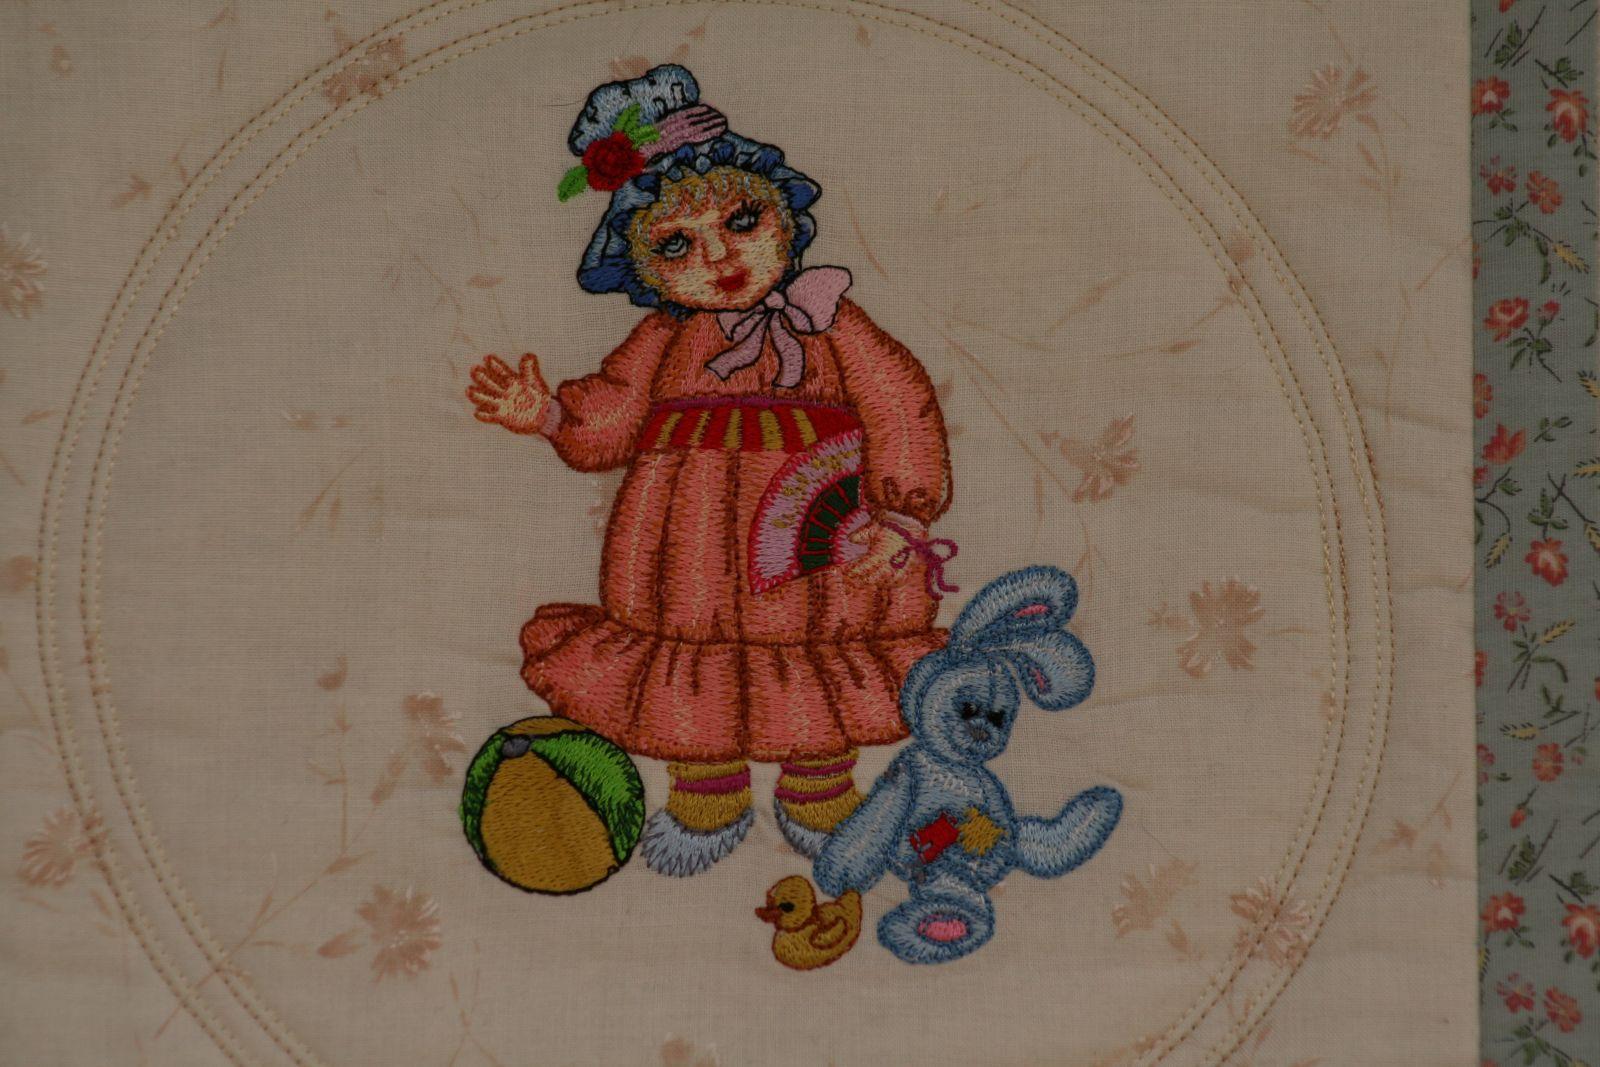 Dancing Threads: The Whimsical Tale of a Doll & Her Bunny Embroidery